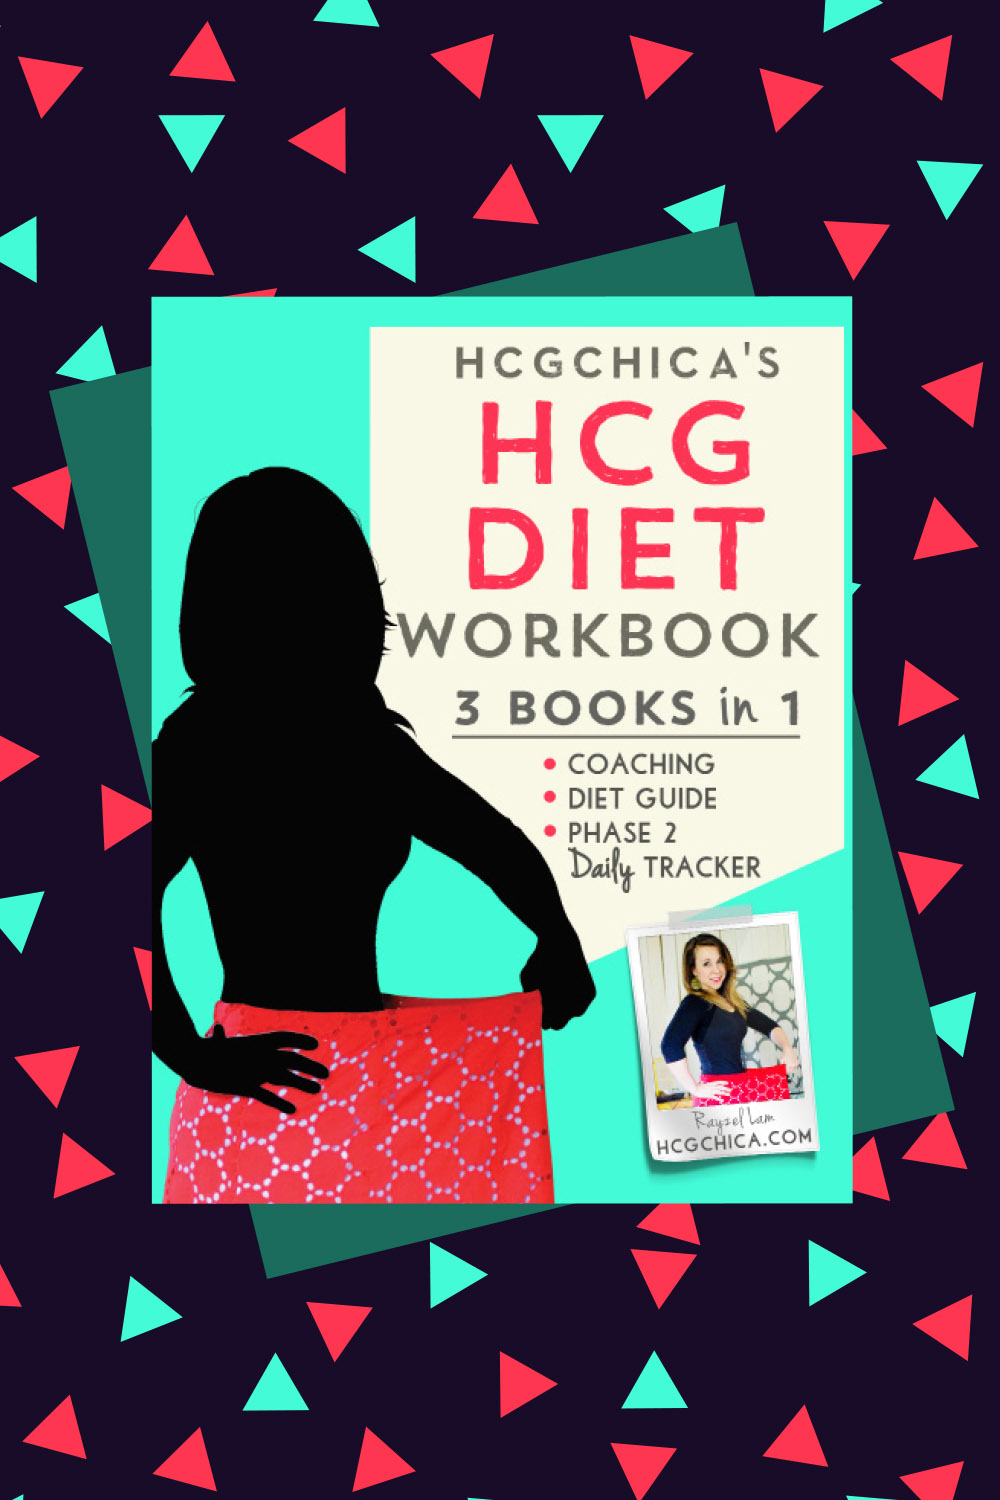 hCG Diet Workbook - Reusable Printable Downloadable Journal - Diet Guide, Coaching, Phase 2 Daily Tracker